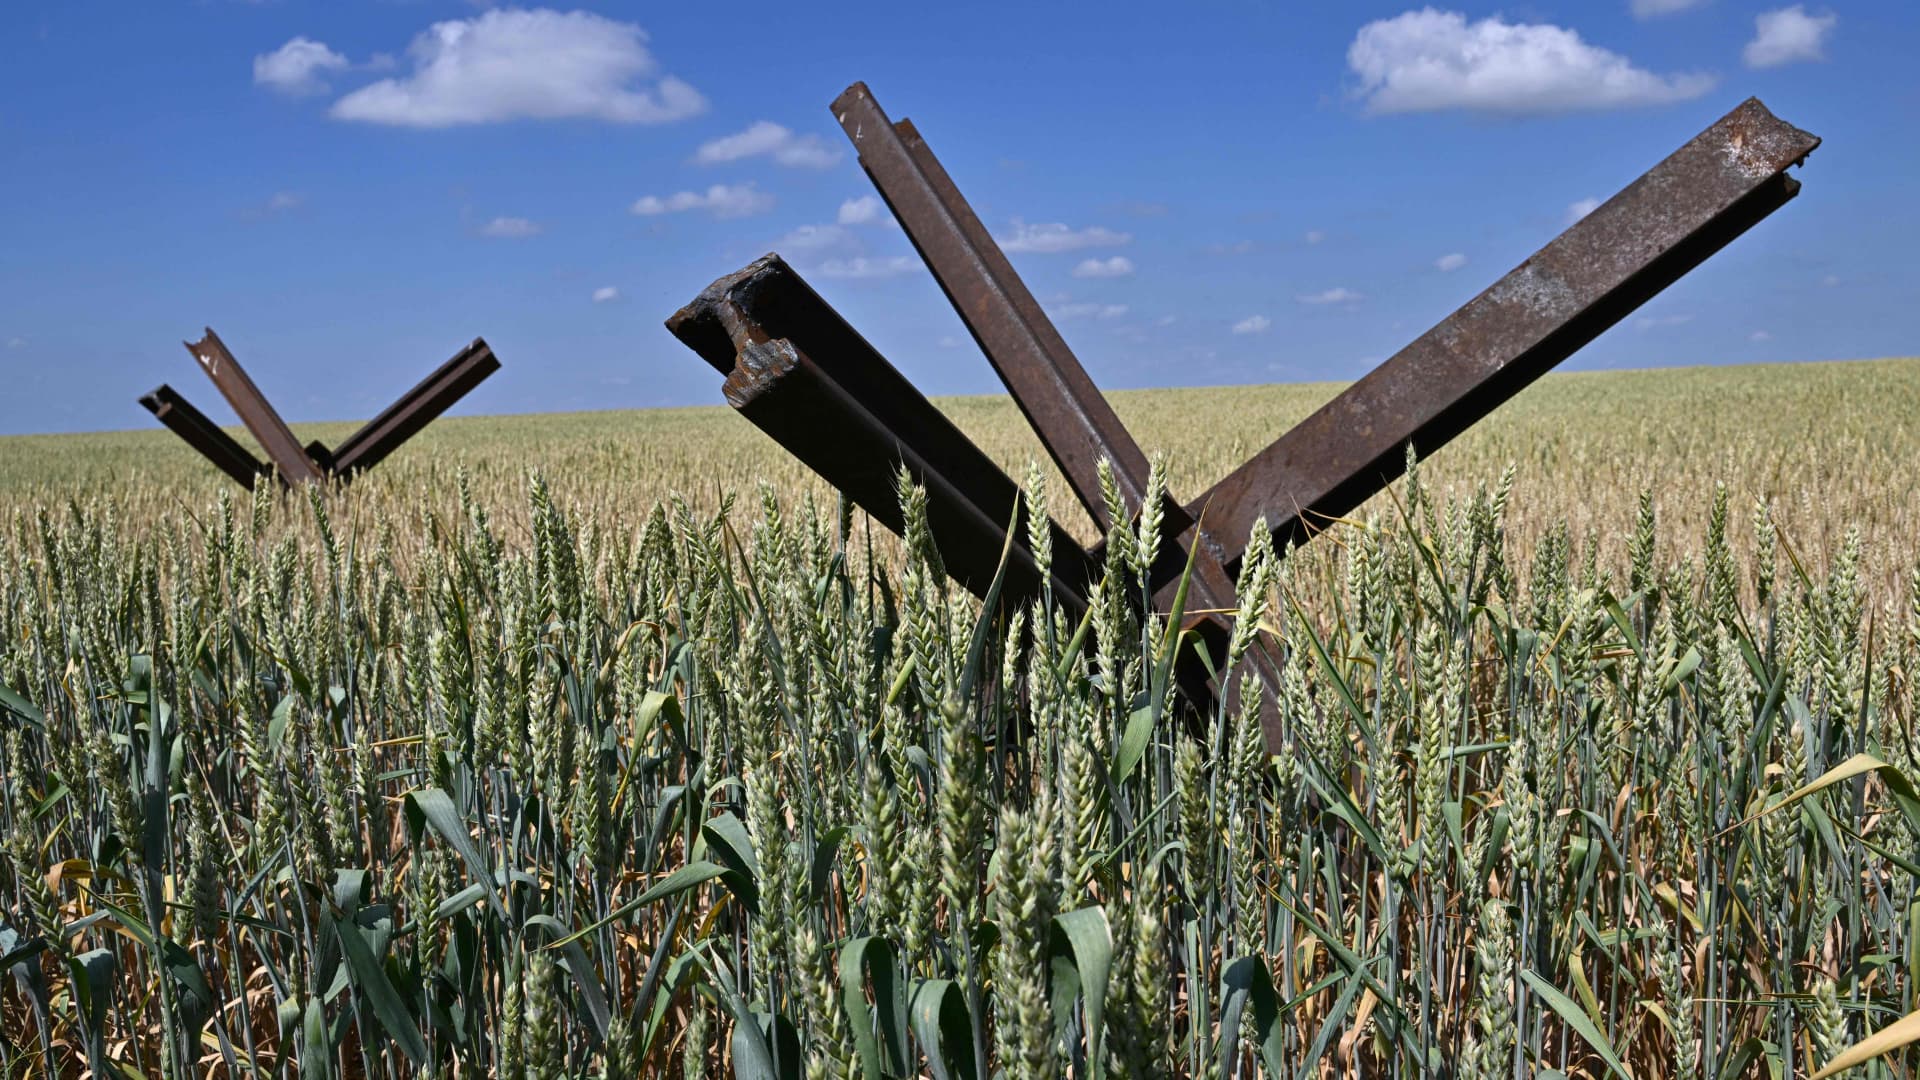 A photograph shows anti-tank obstacles on a wheat field at a farm in southern Ukraine's Mykolaiv region, on June 11, 2022, amid the Russian invasion of Ukraine.